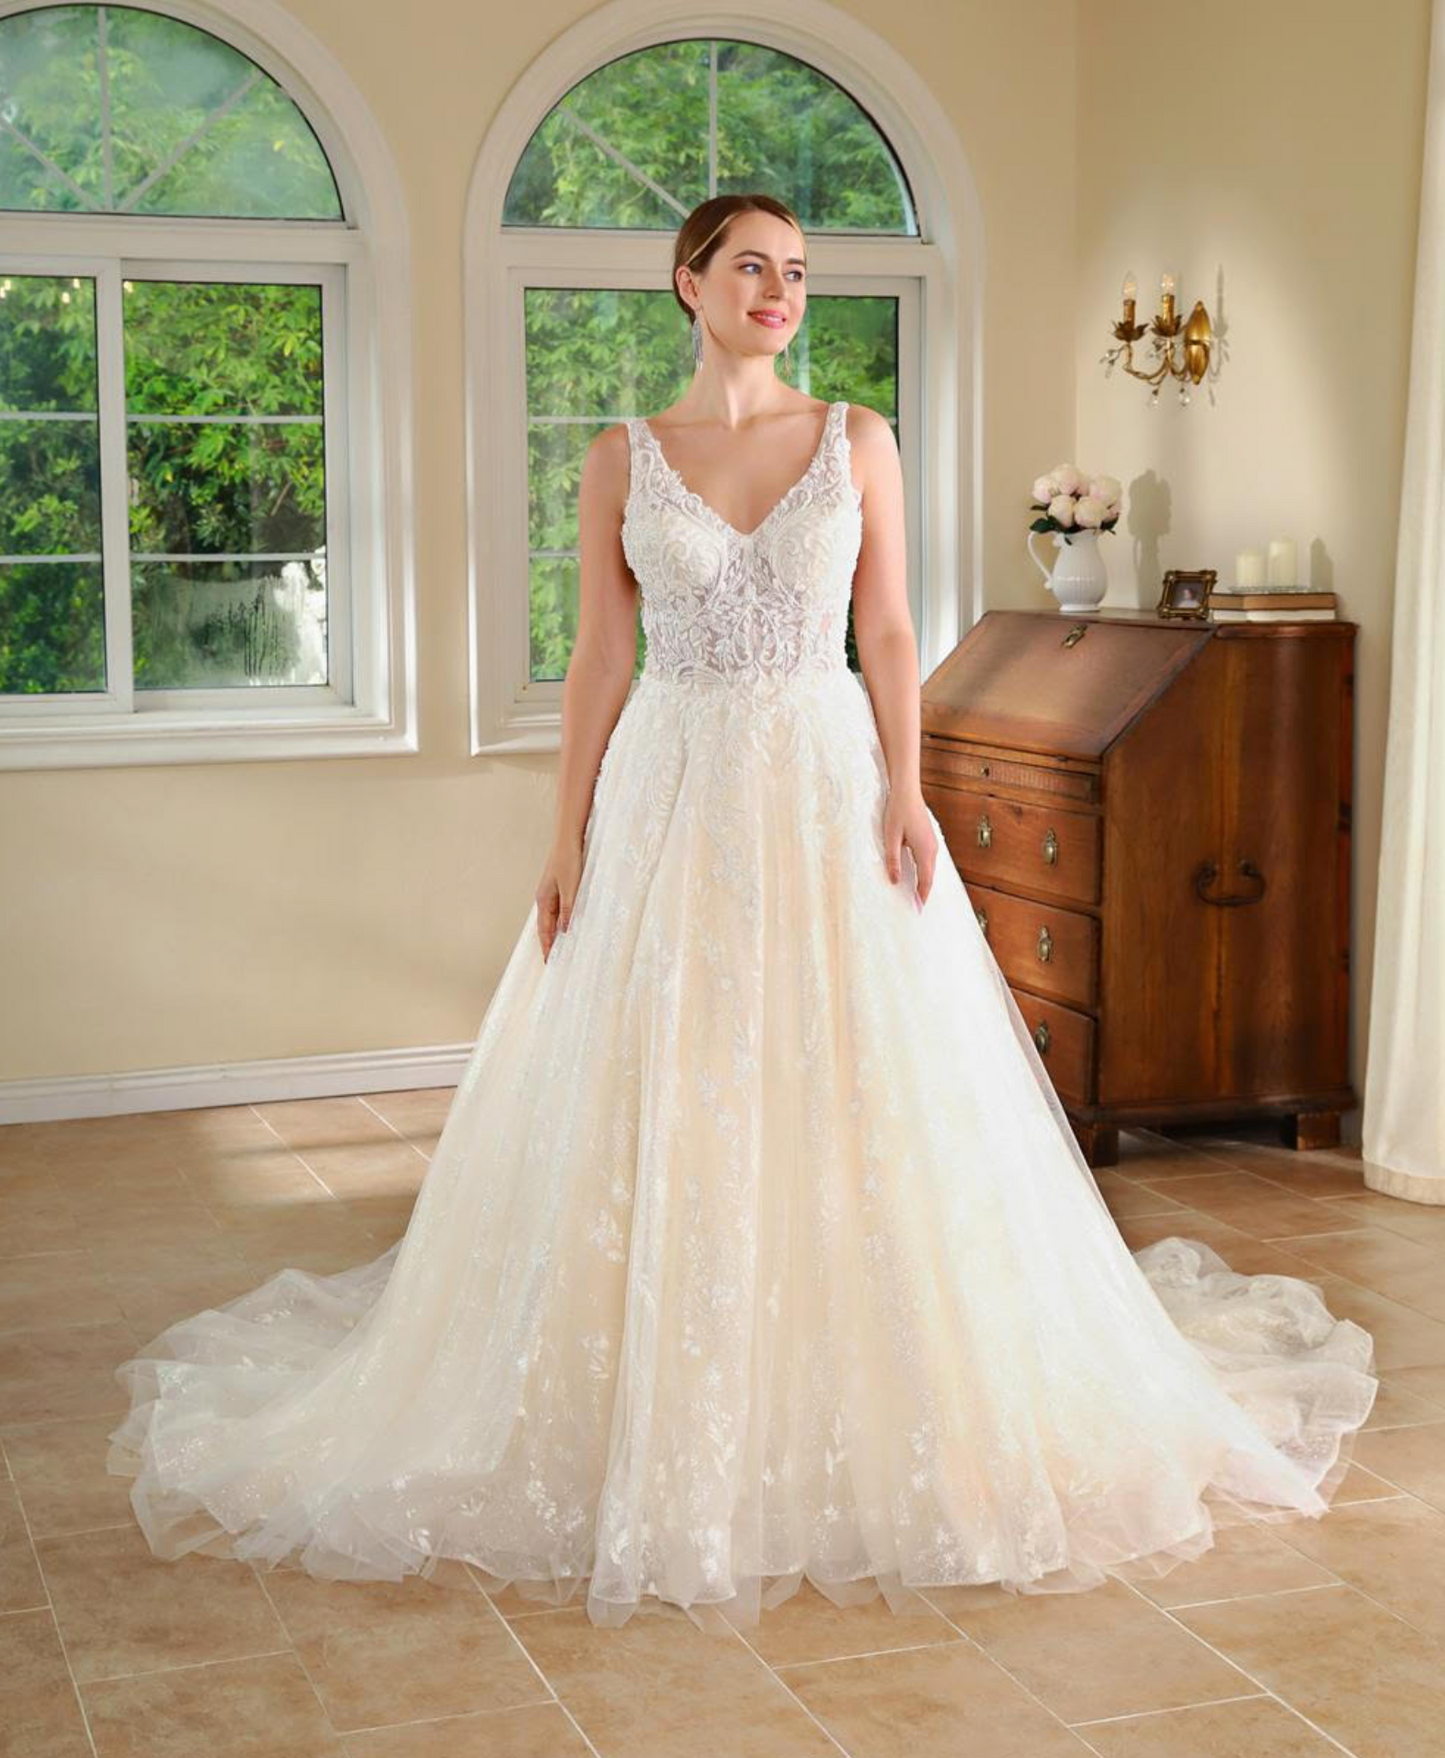 Lace A Line Princess Wedding Gown with Illusion Sides